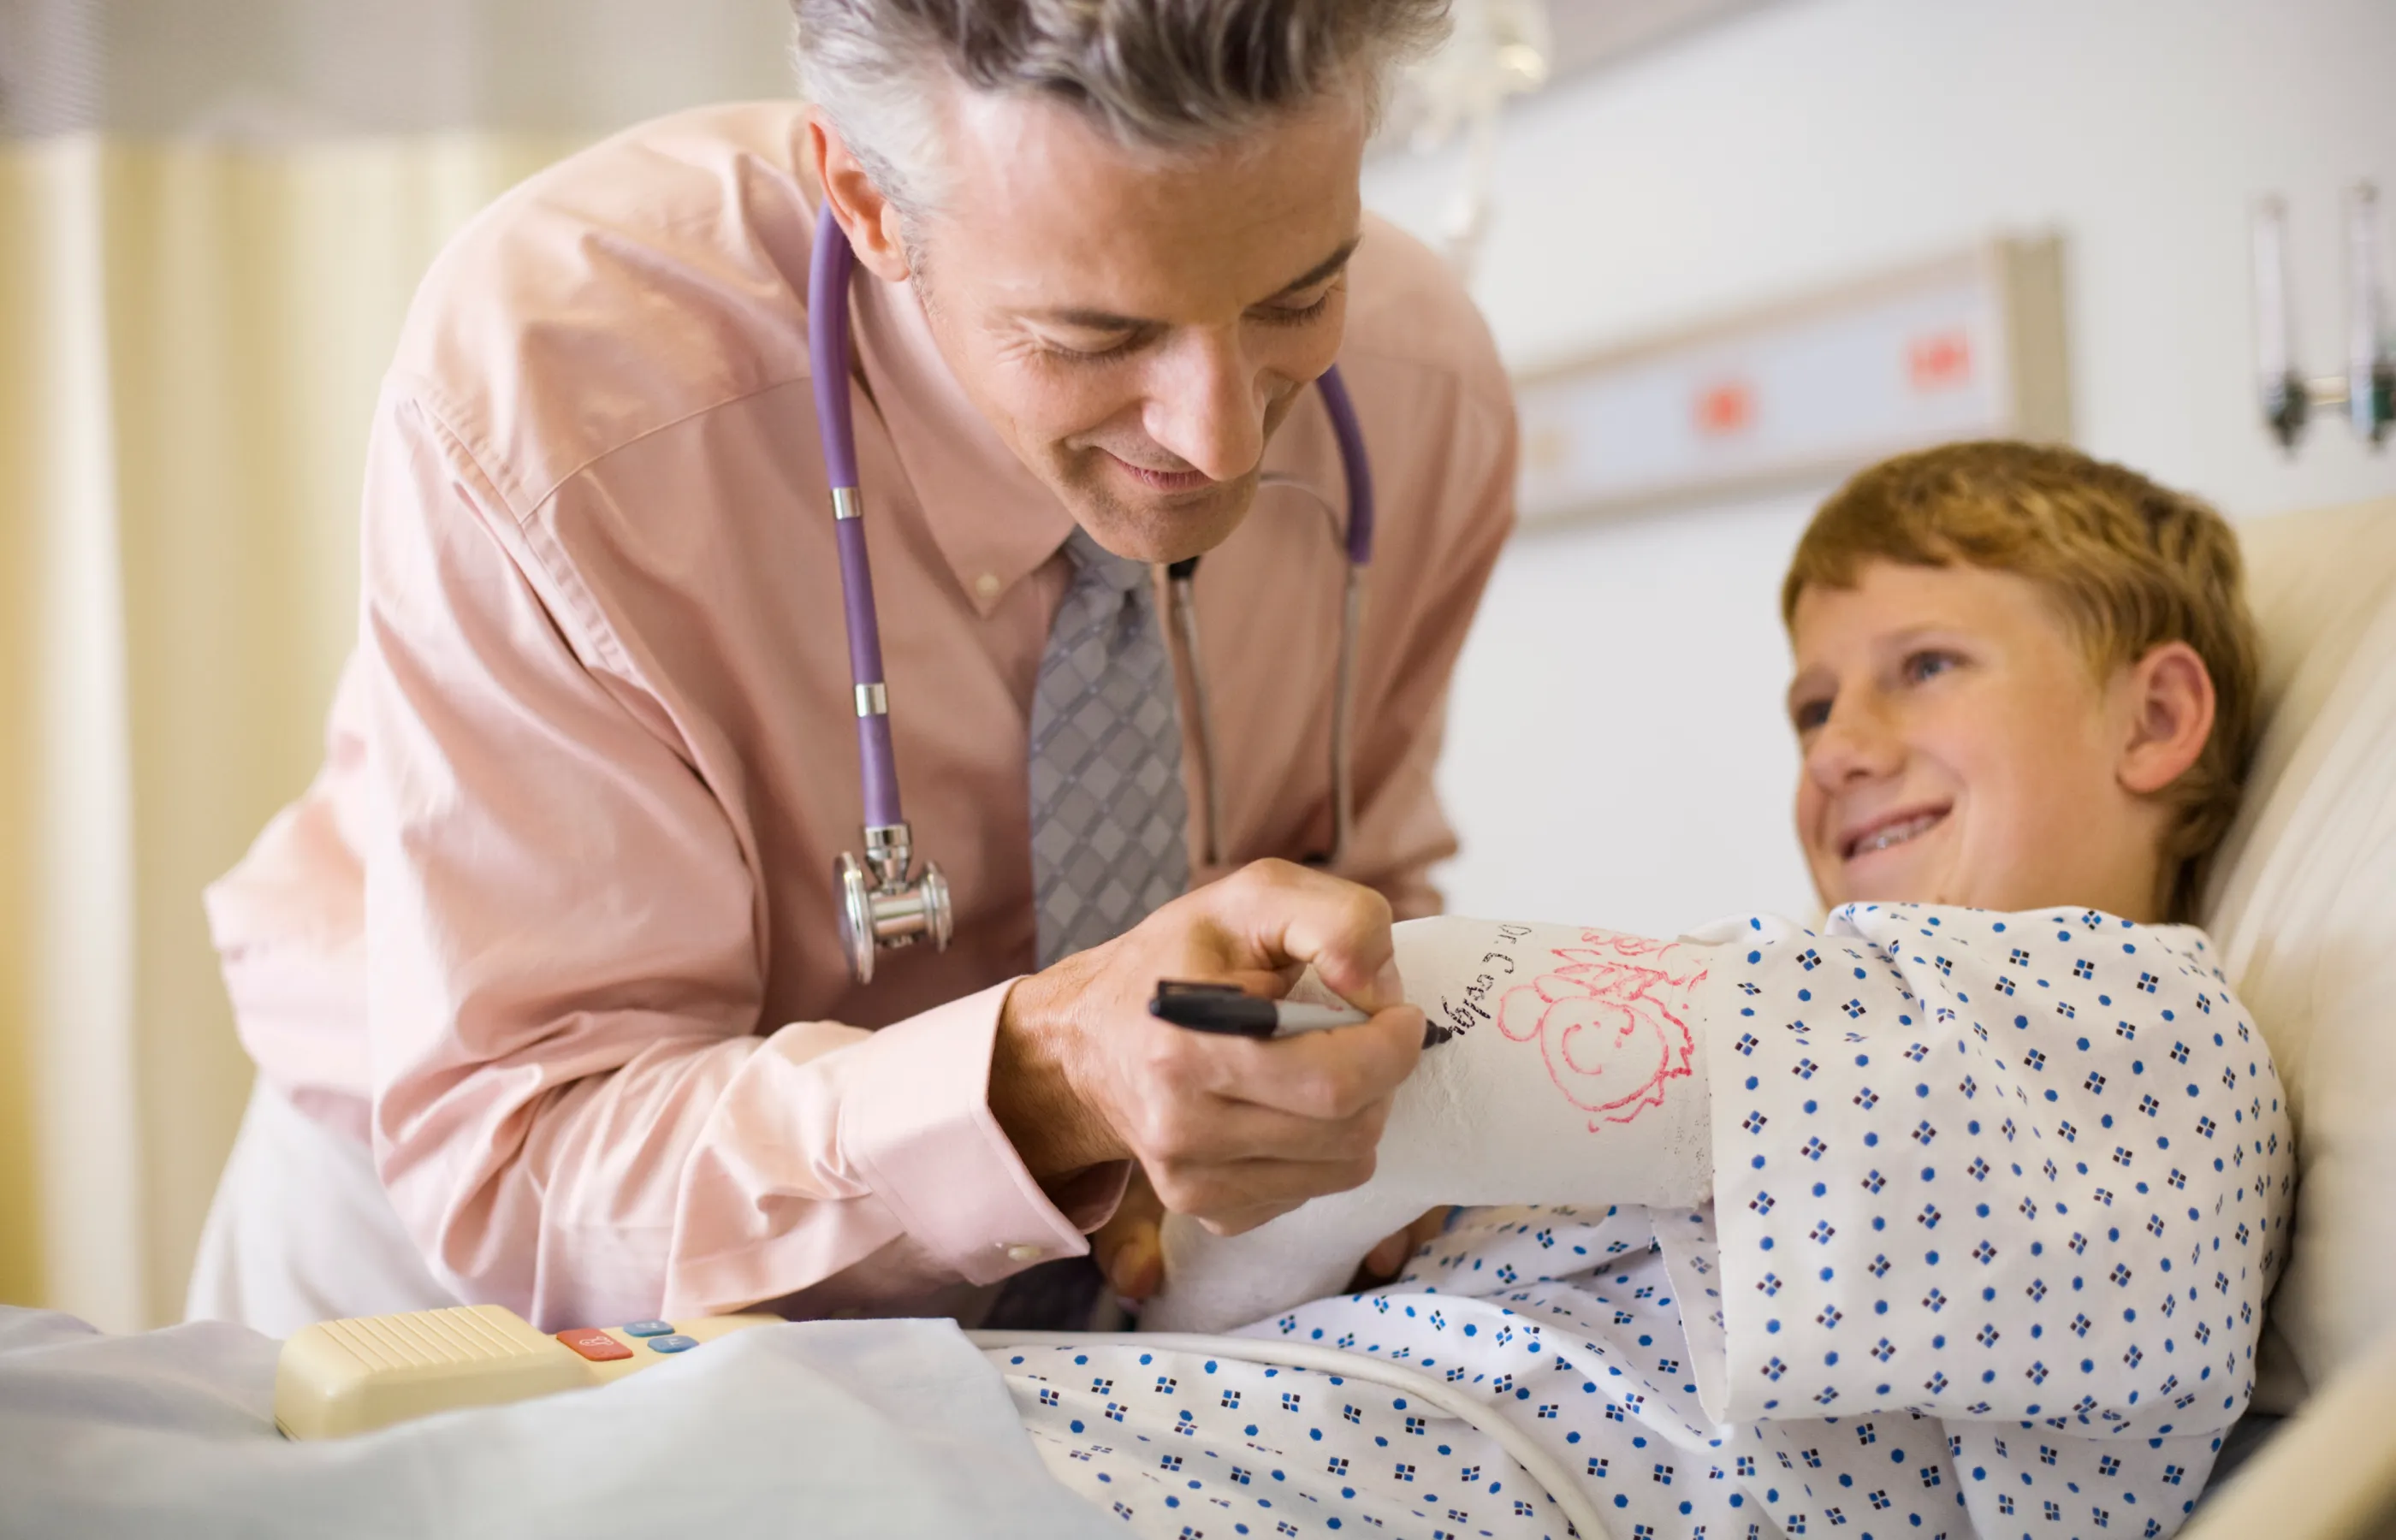 Pediatric orthopedic doctor signs an elementary age boy's broken arm as the boy lays in hospital bed. 